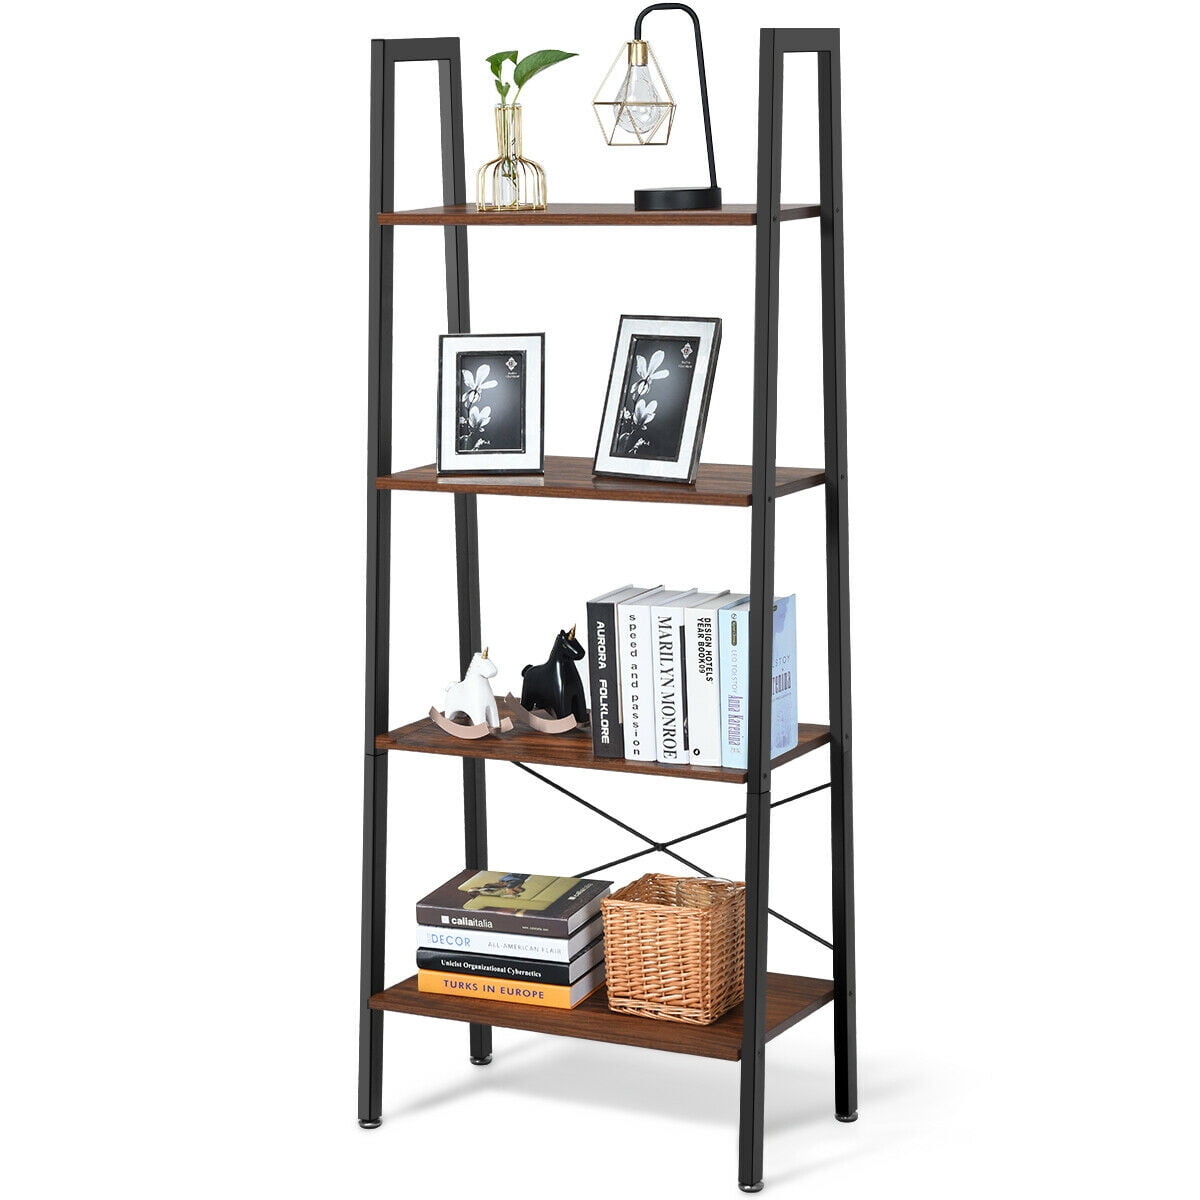 Details about   3/4 Tier Bookcase Ladder Shelving Leaning Shelf Plant Storage Display Wood Stand 